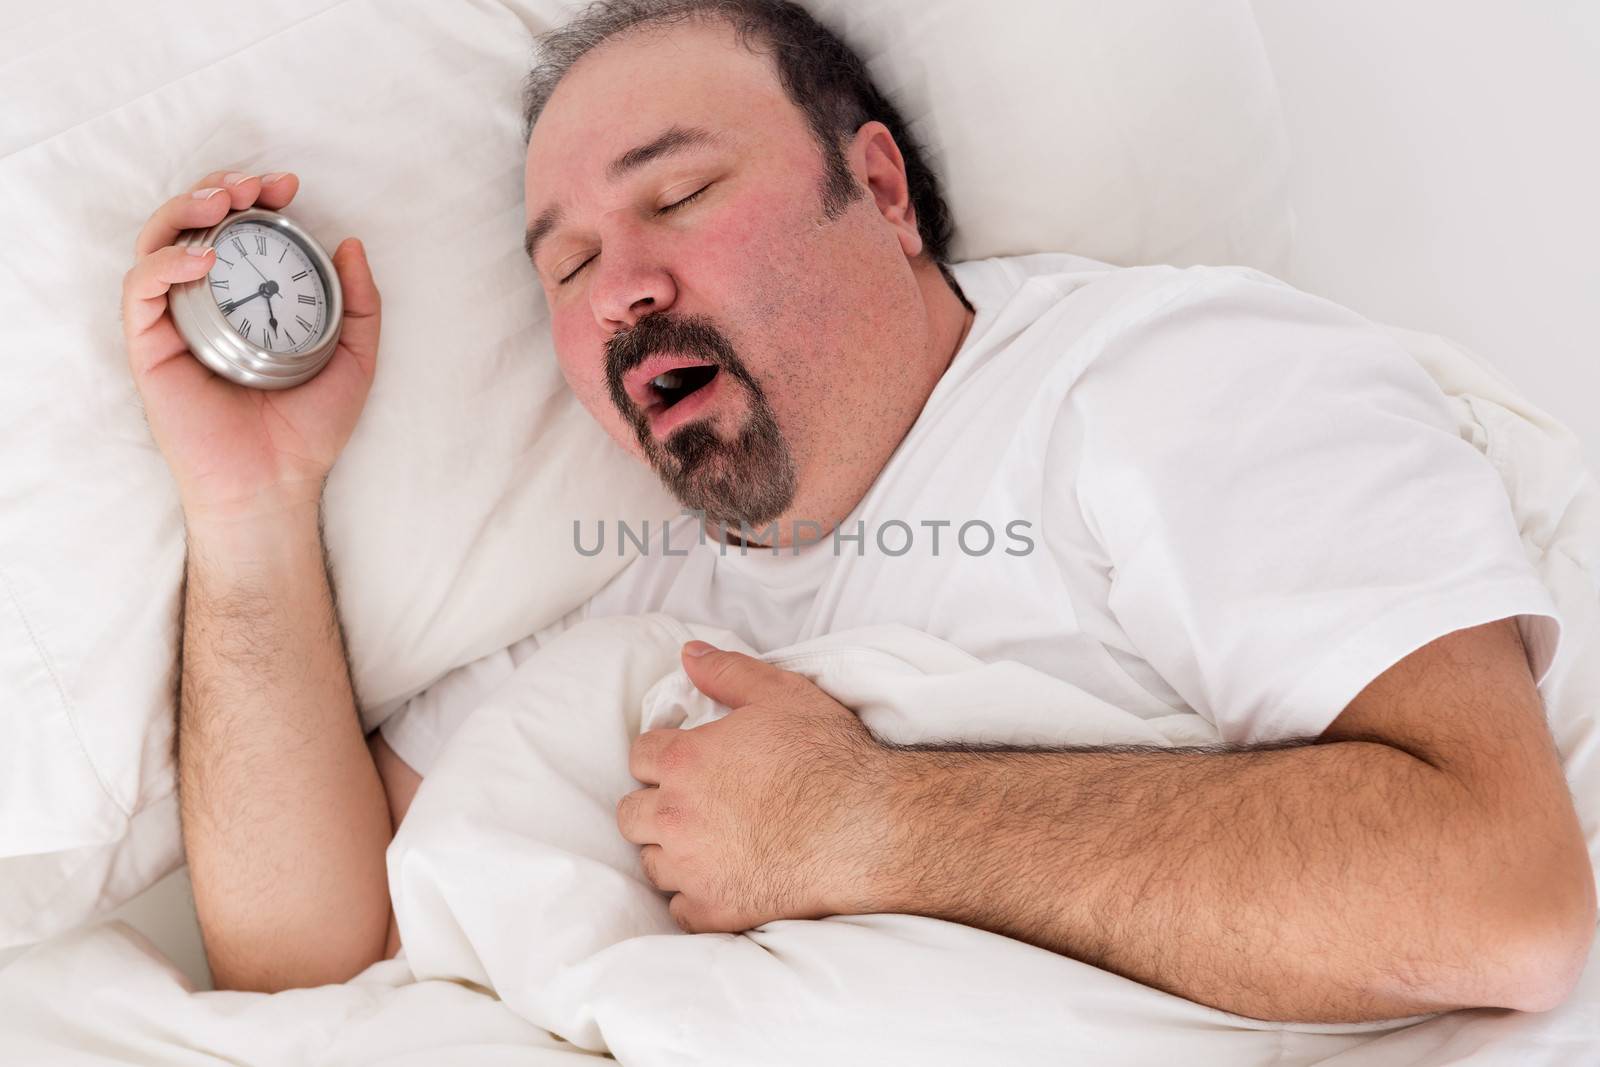 Lethargic tired man lying in bed yawning as he struggles to wake up unmotivated to start the new day and content to rather continue lying in bed as he holds his alarm clock in his hand